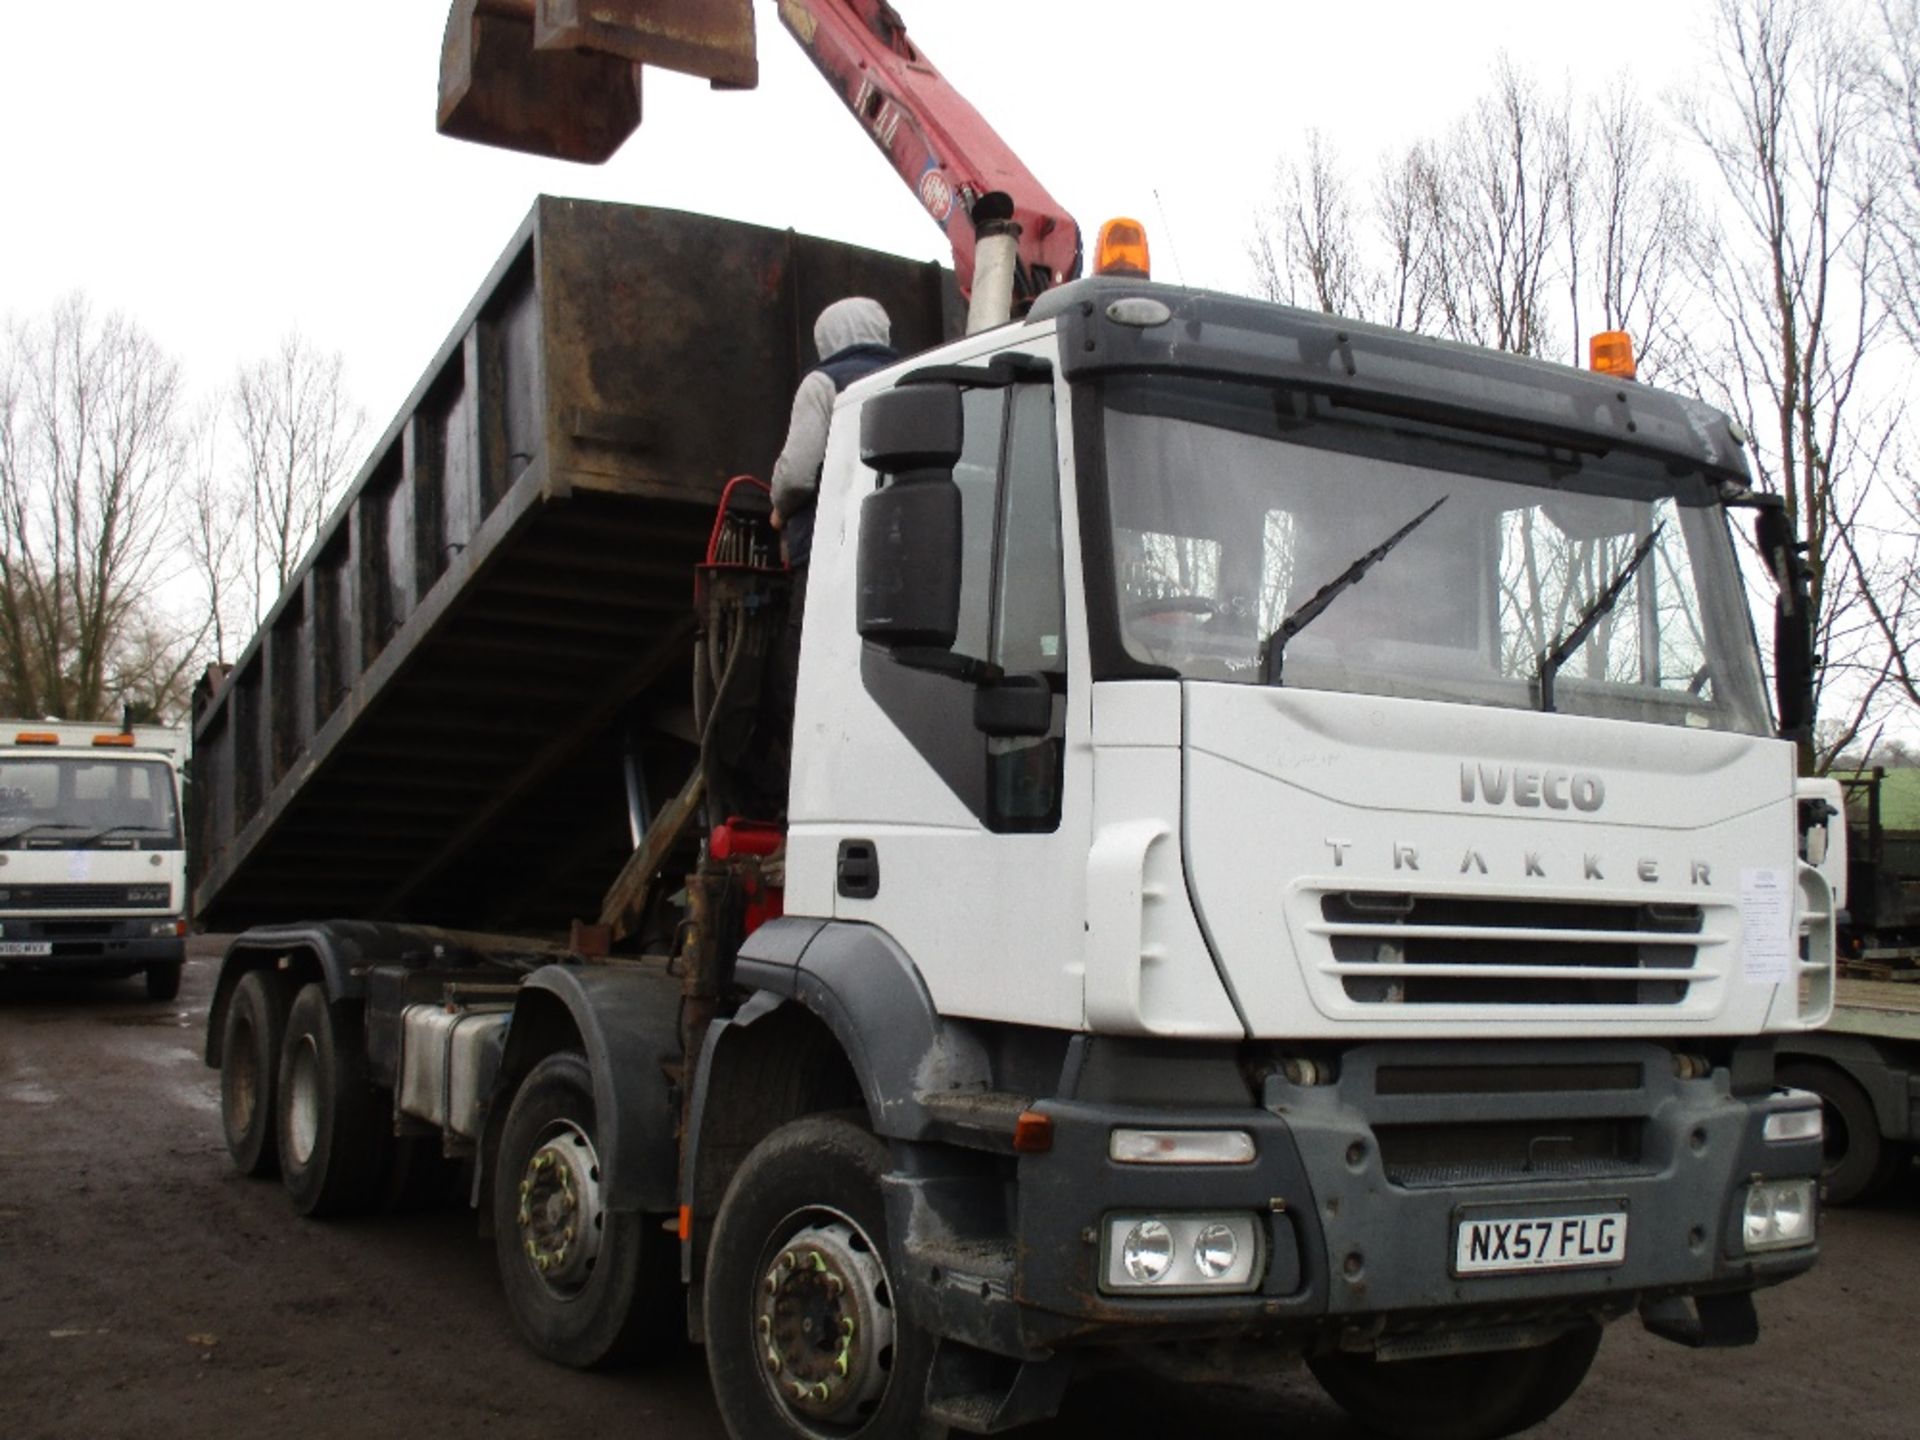 IVECO EUROTRAKER 8X4 TIPPER GRAB LORRY WITH HMF 1144 CRANE - Image 20 of 24